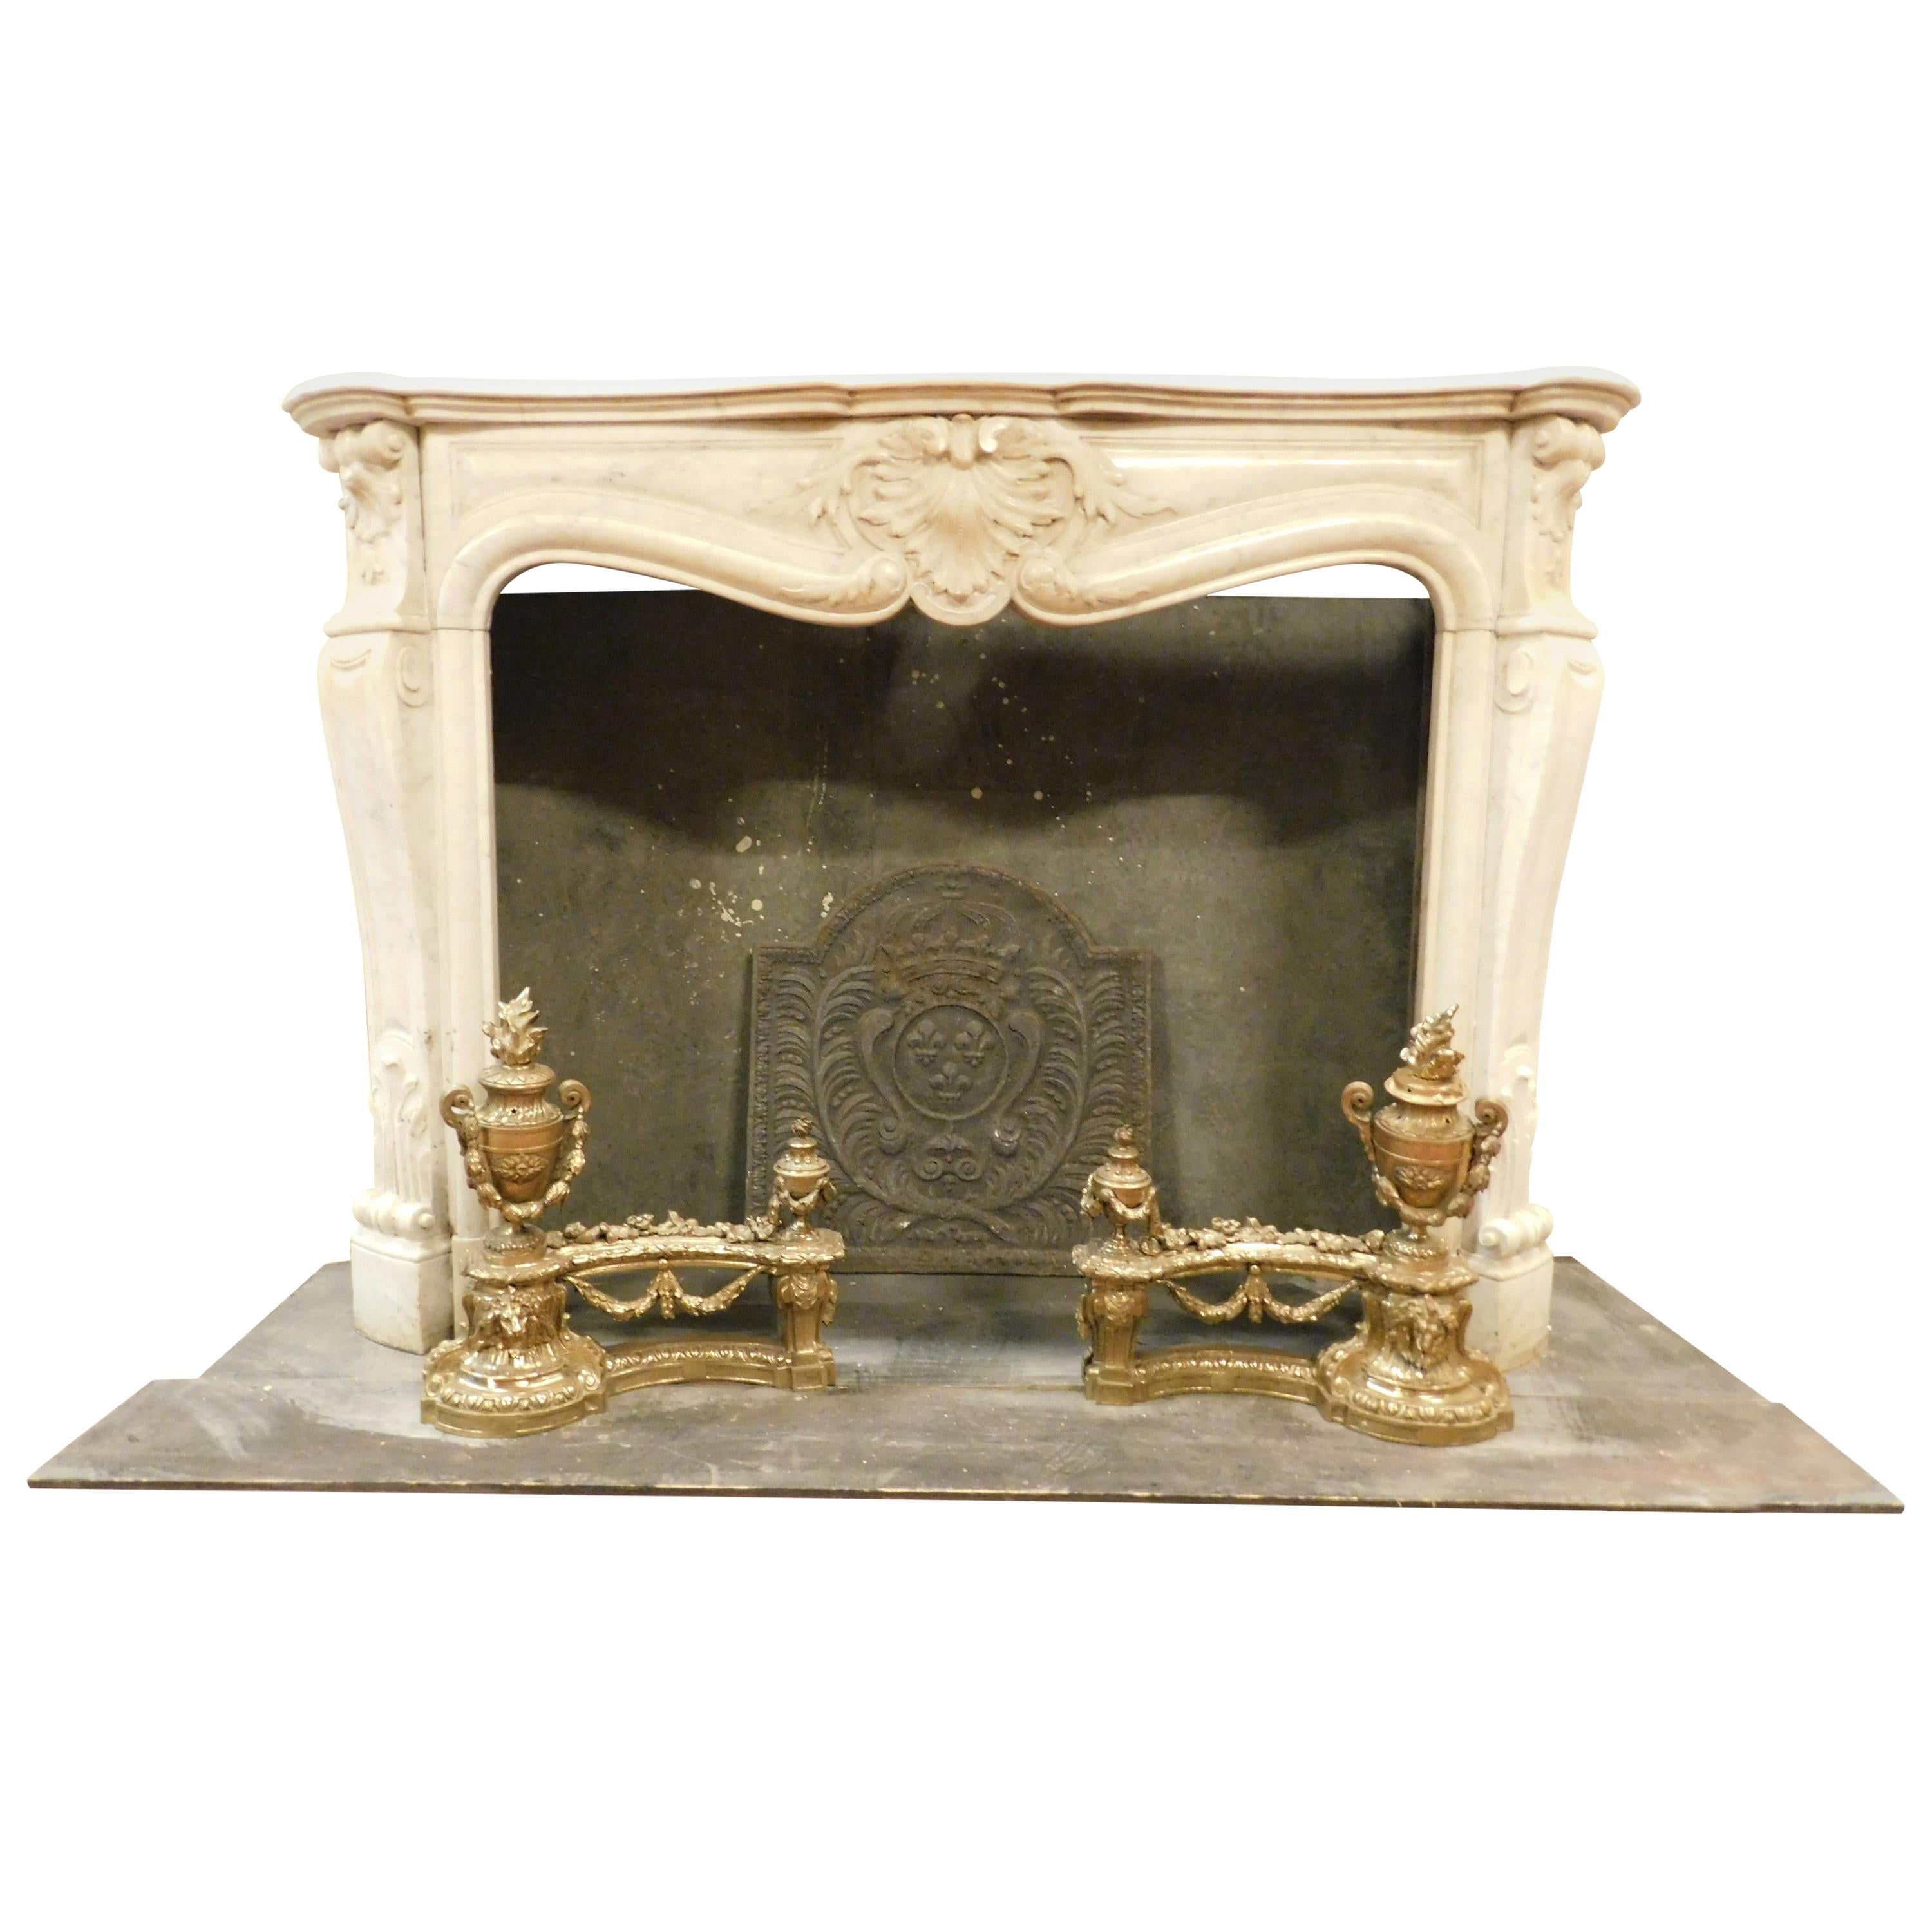 Antique Fireplace in White Carrara Marble, Carved Shells, 1700, France